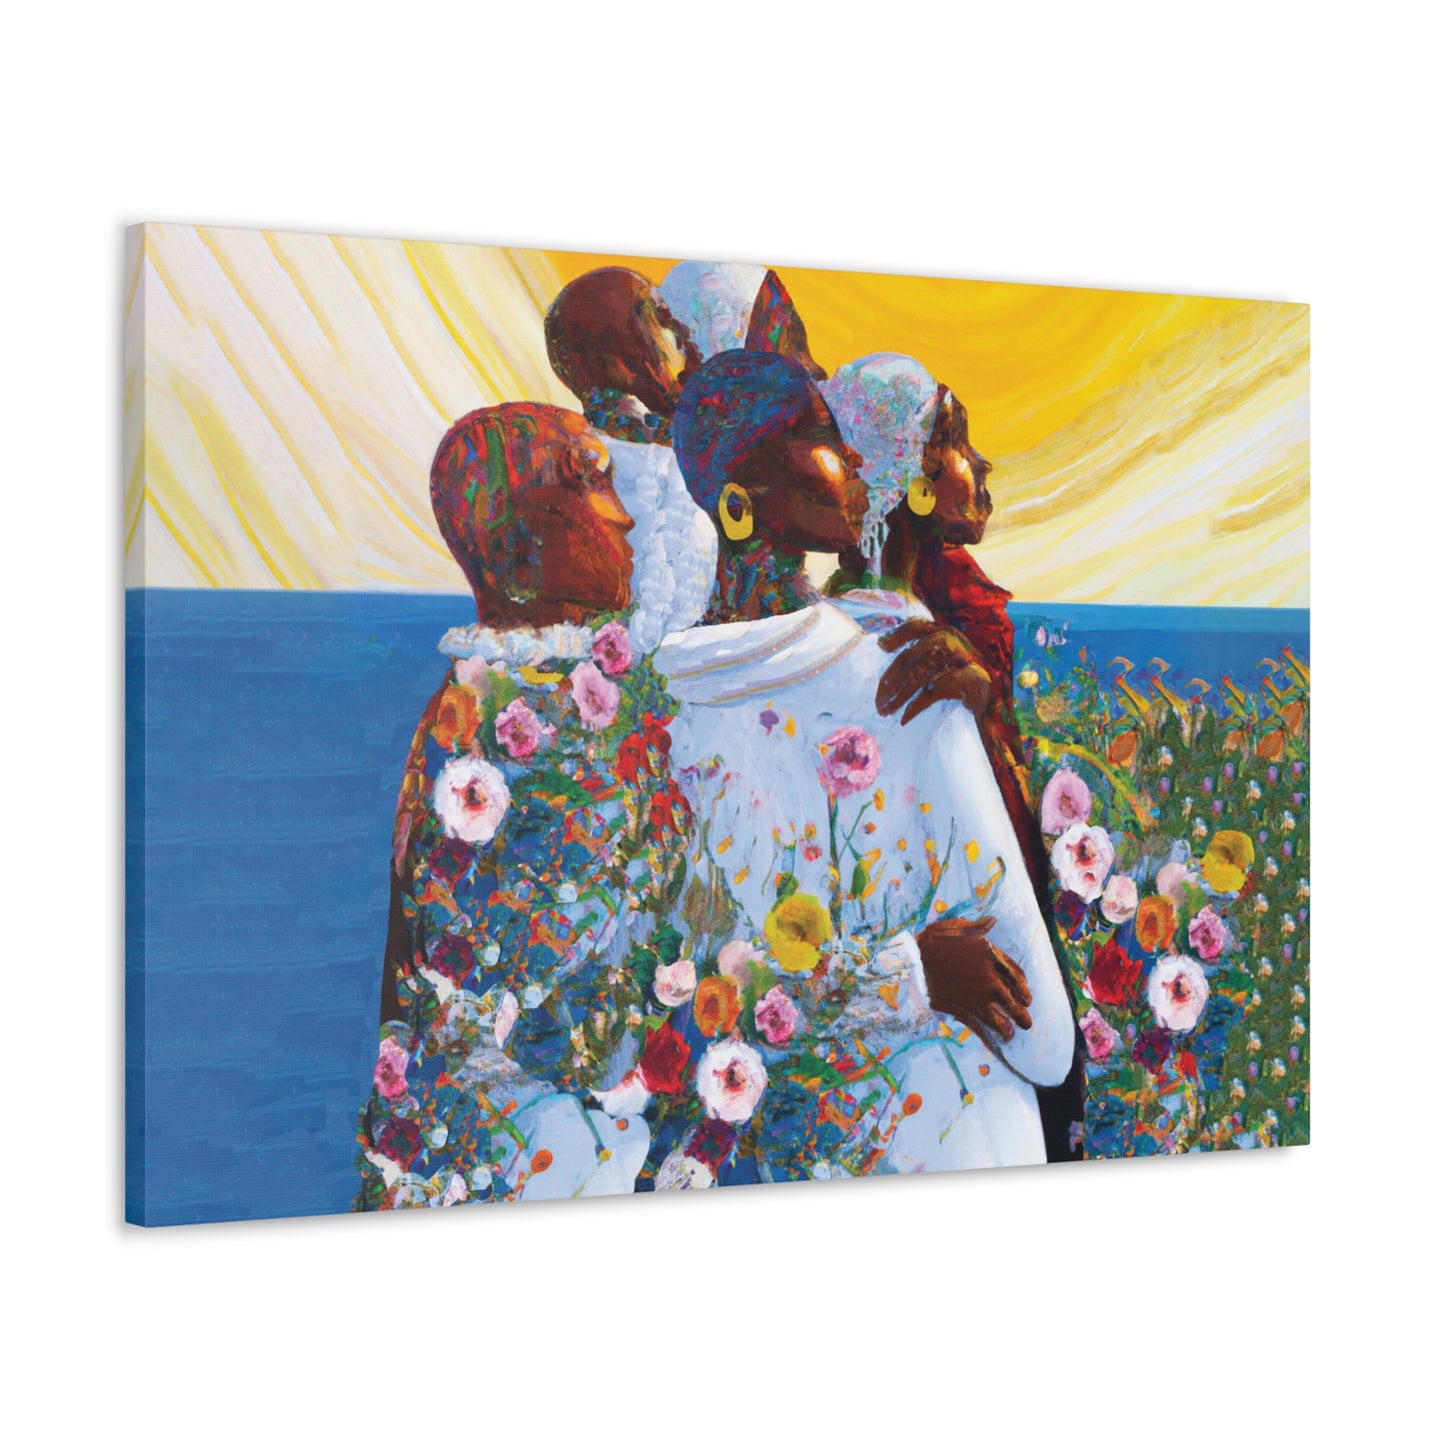 Someday They Will Return Canvas Gallery Wraps